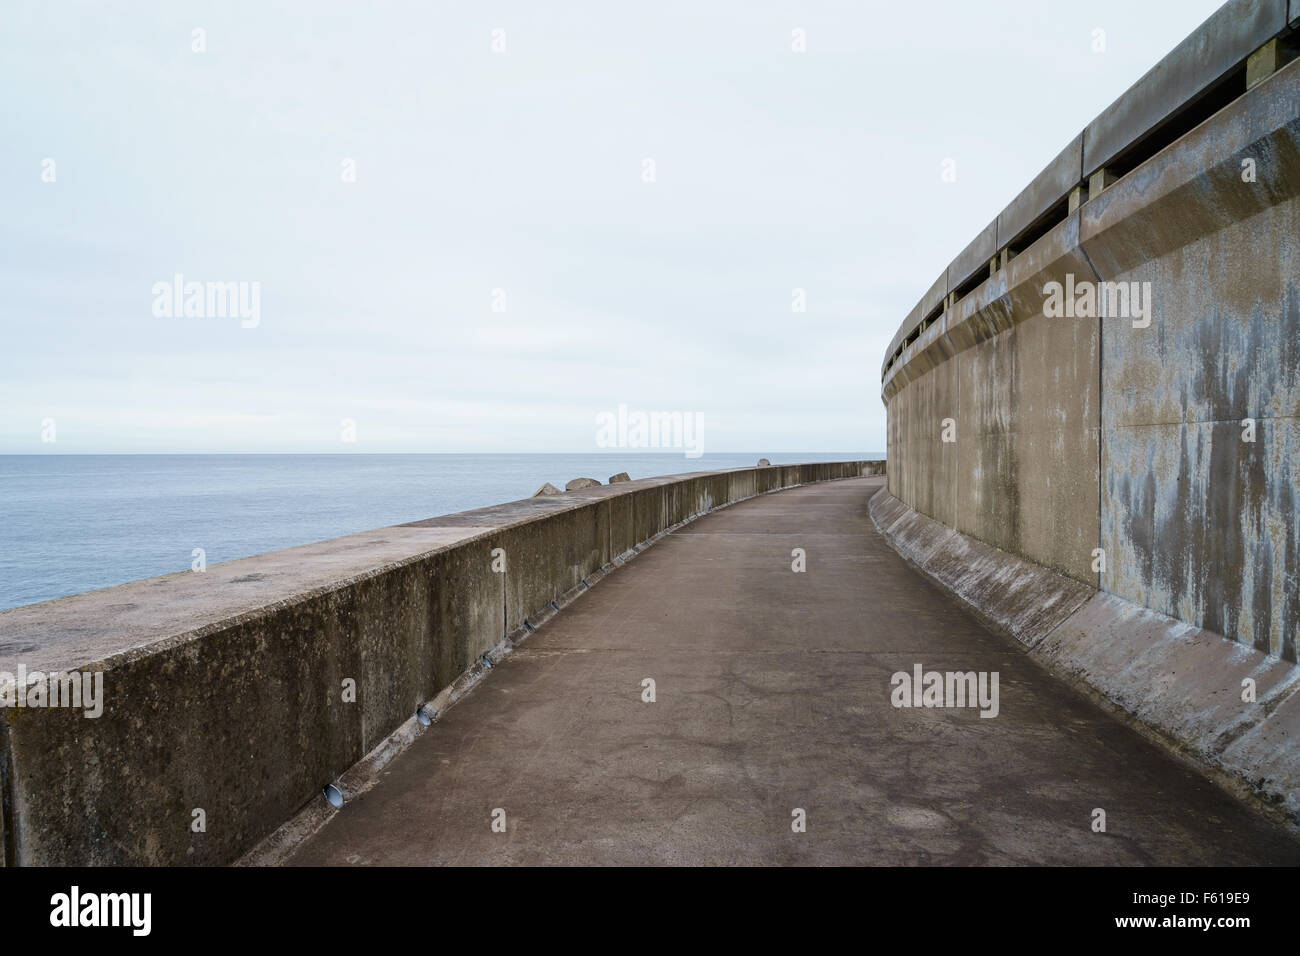 Concrete sea wall at the Torness nuclear power station, Scotland. Stock Photo